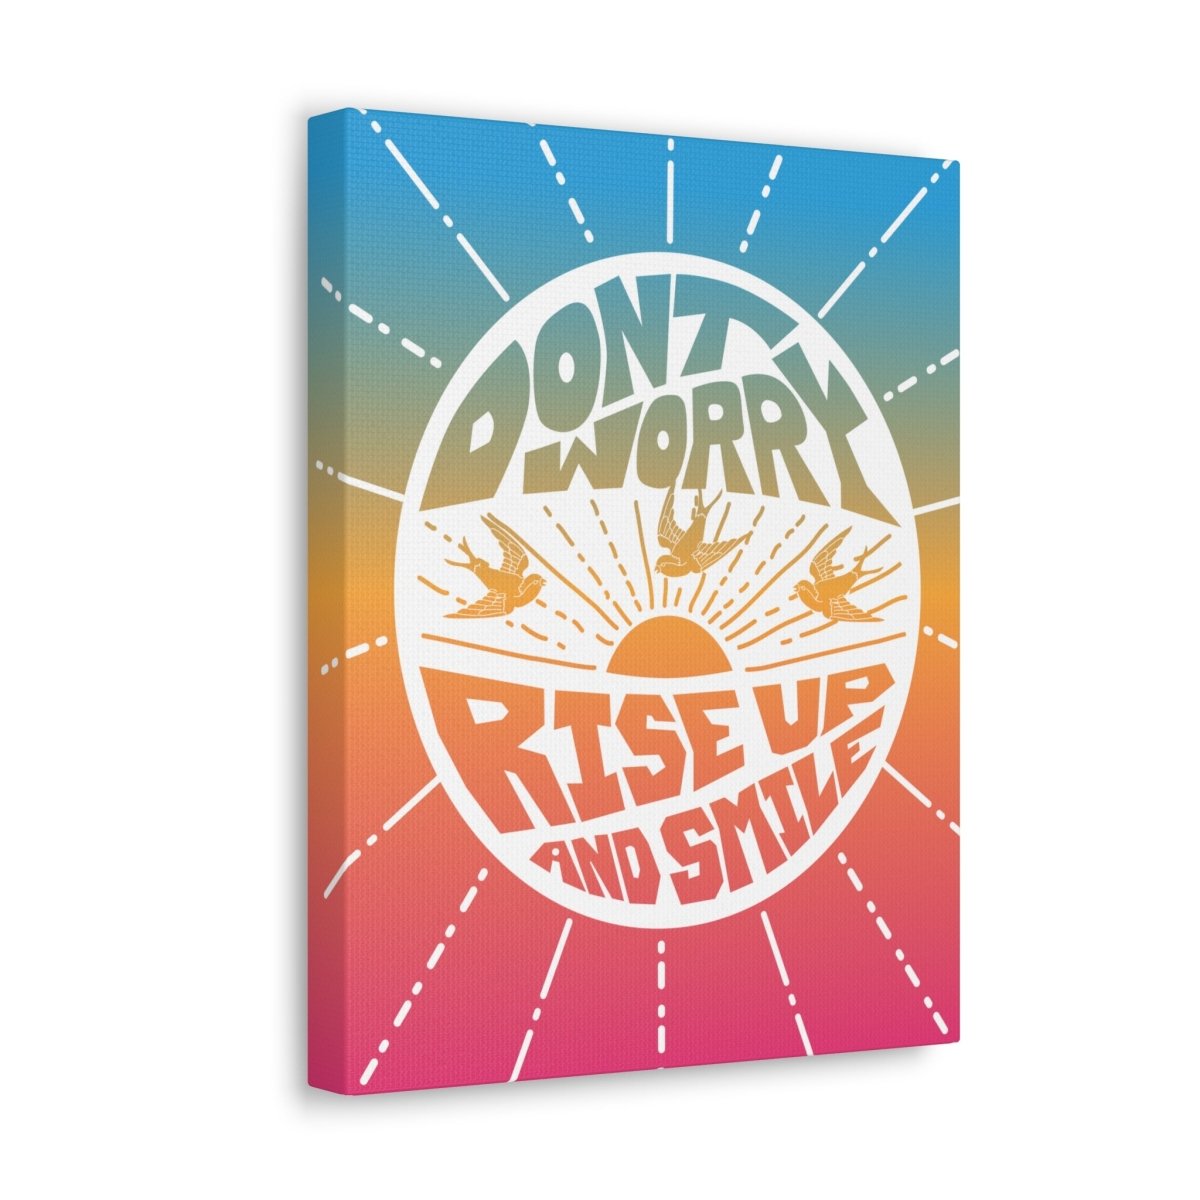 Don't Worry Wall Art Canvas Wrap, Smile, Happy, Zen, Peace, Love Gift